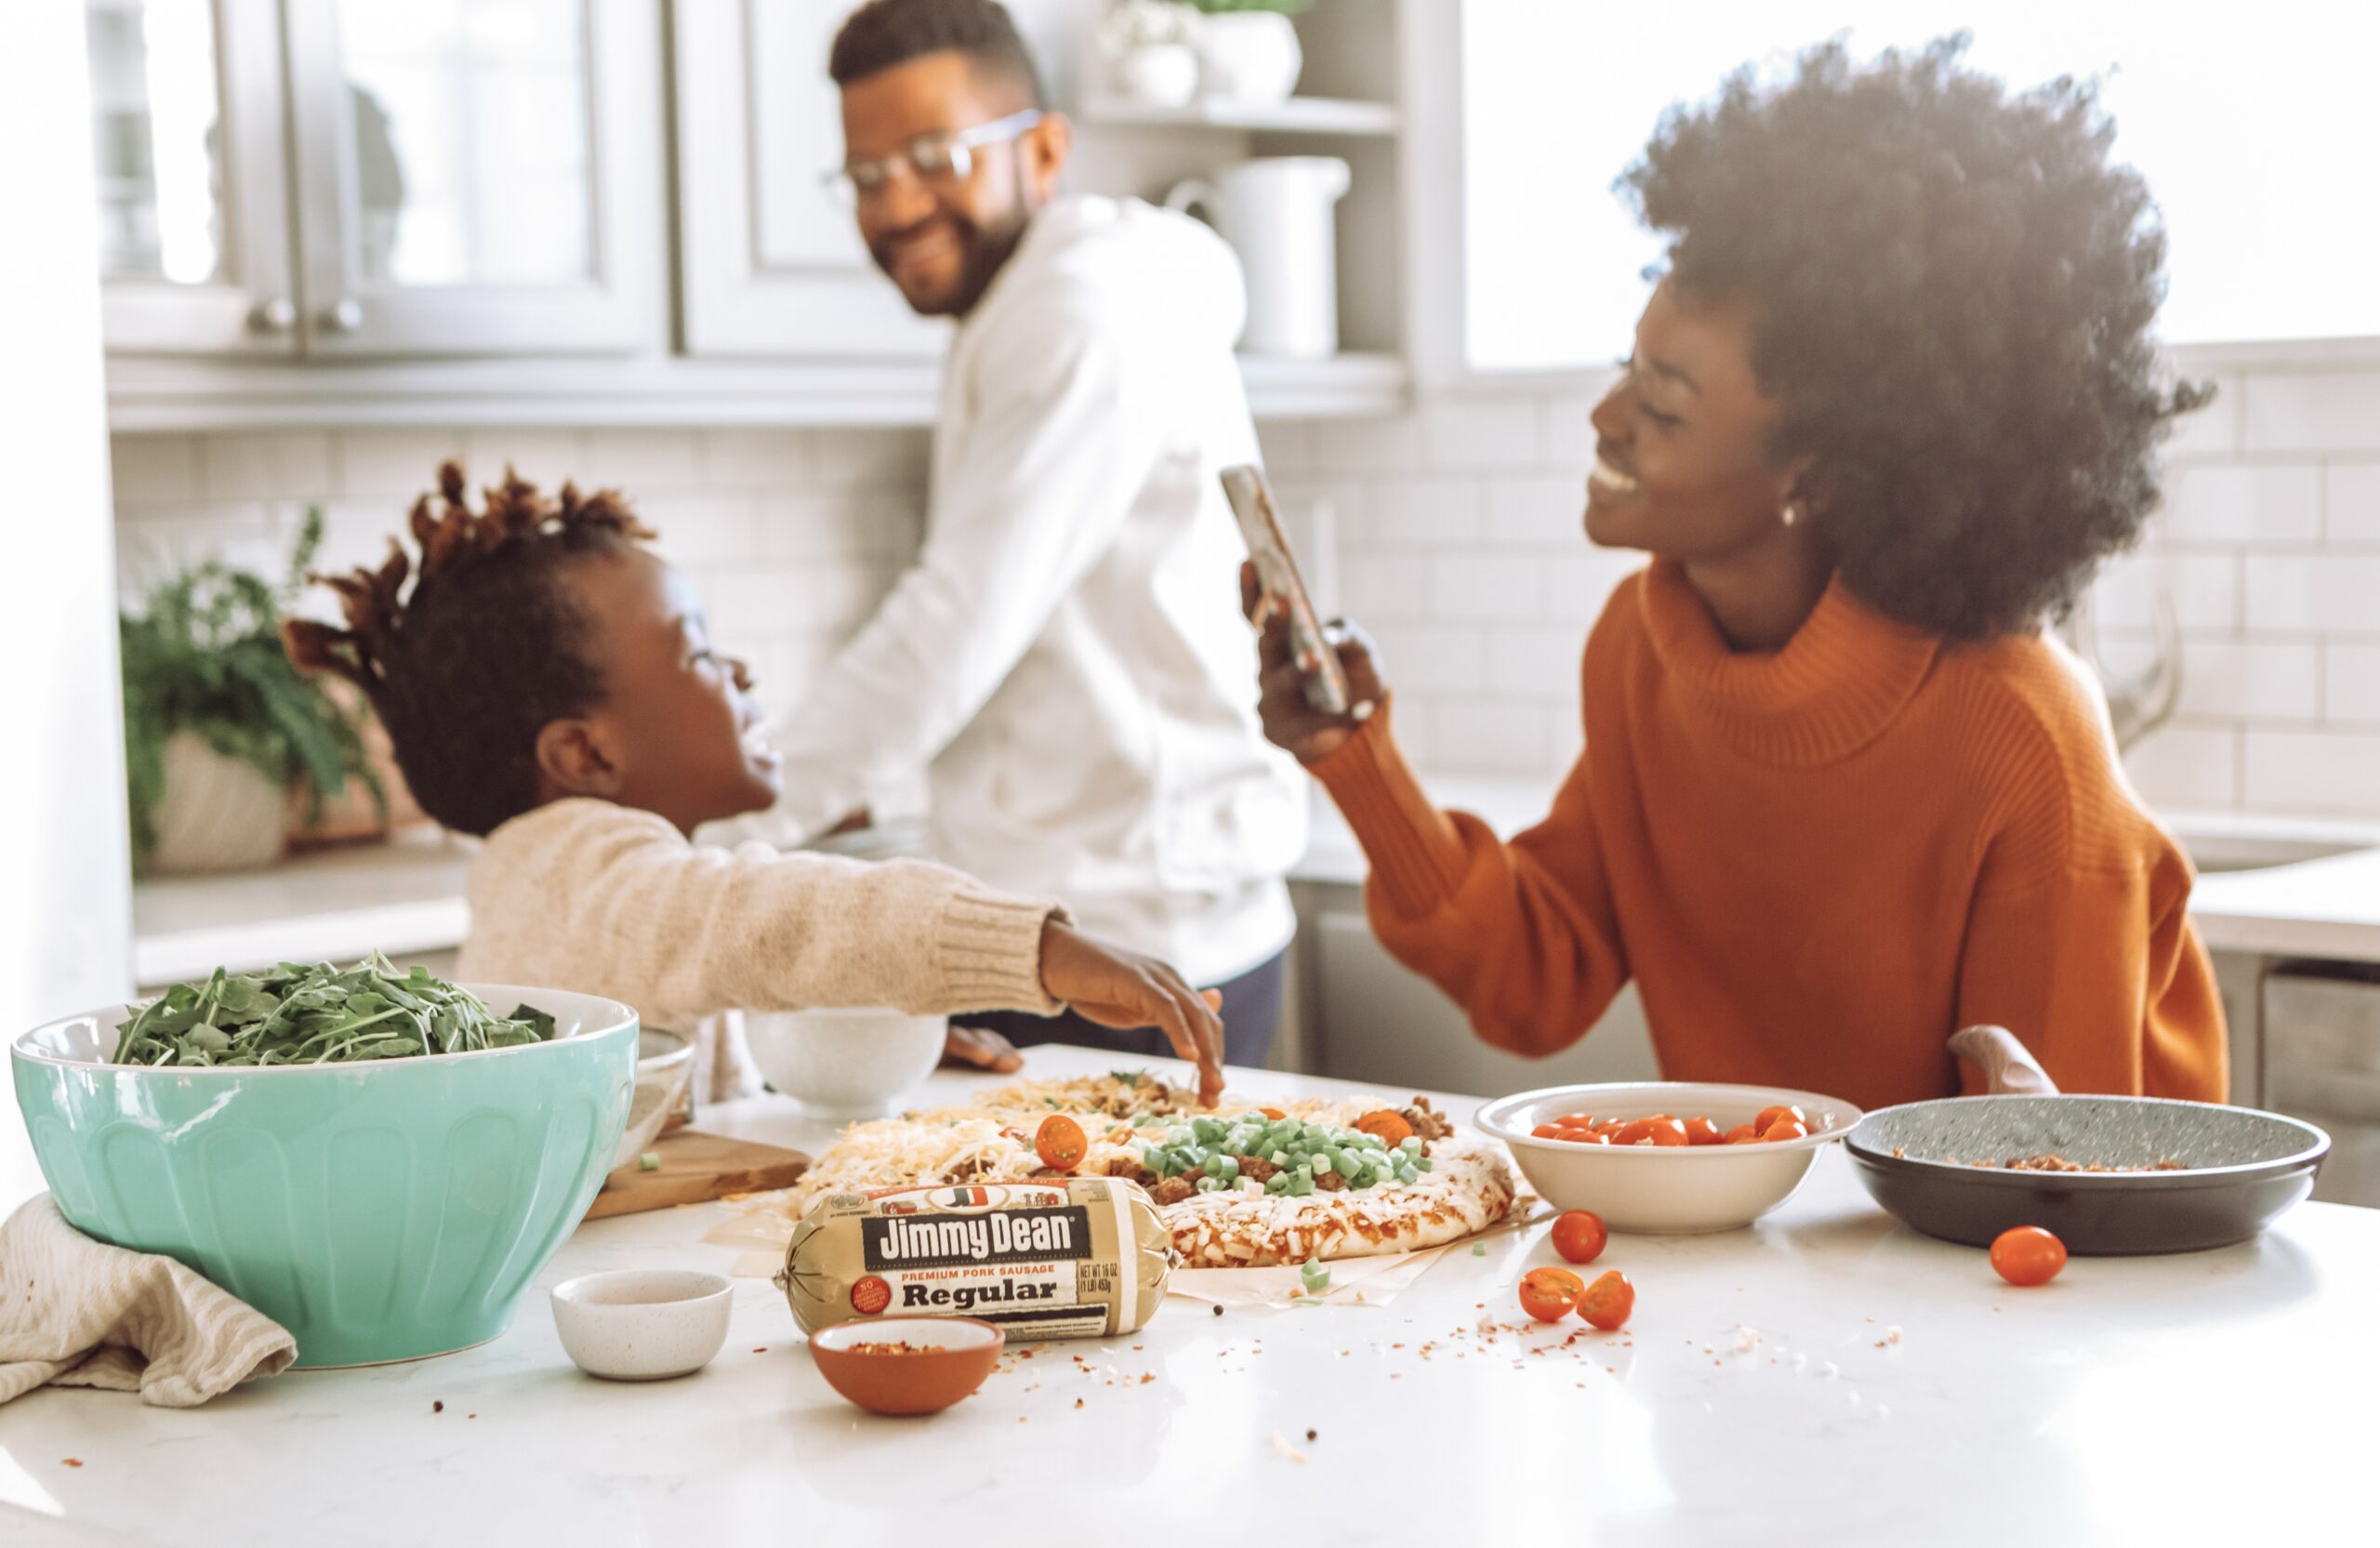 Can You Make Your Home More Family Friendly?